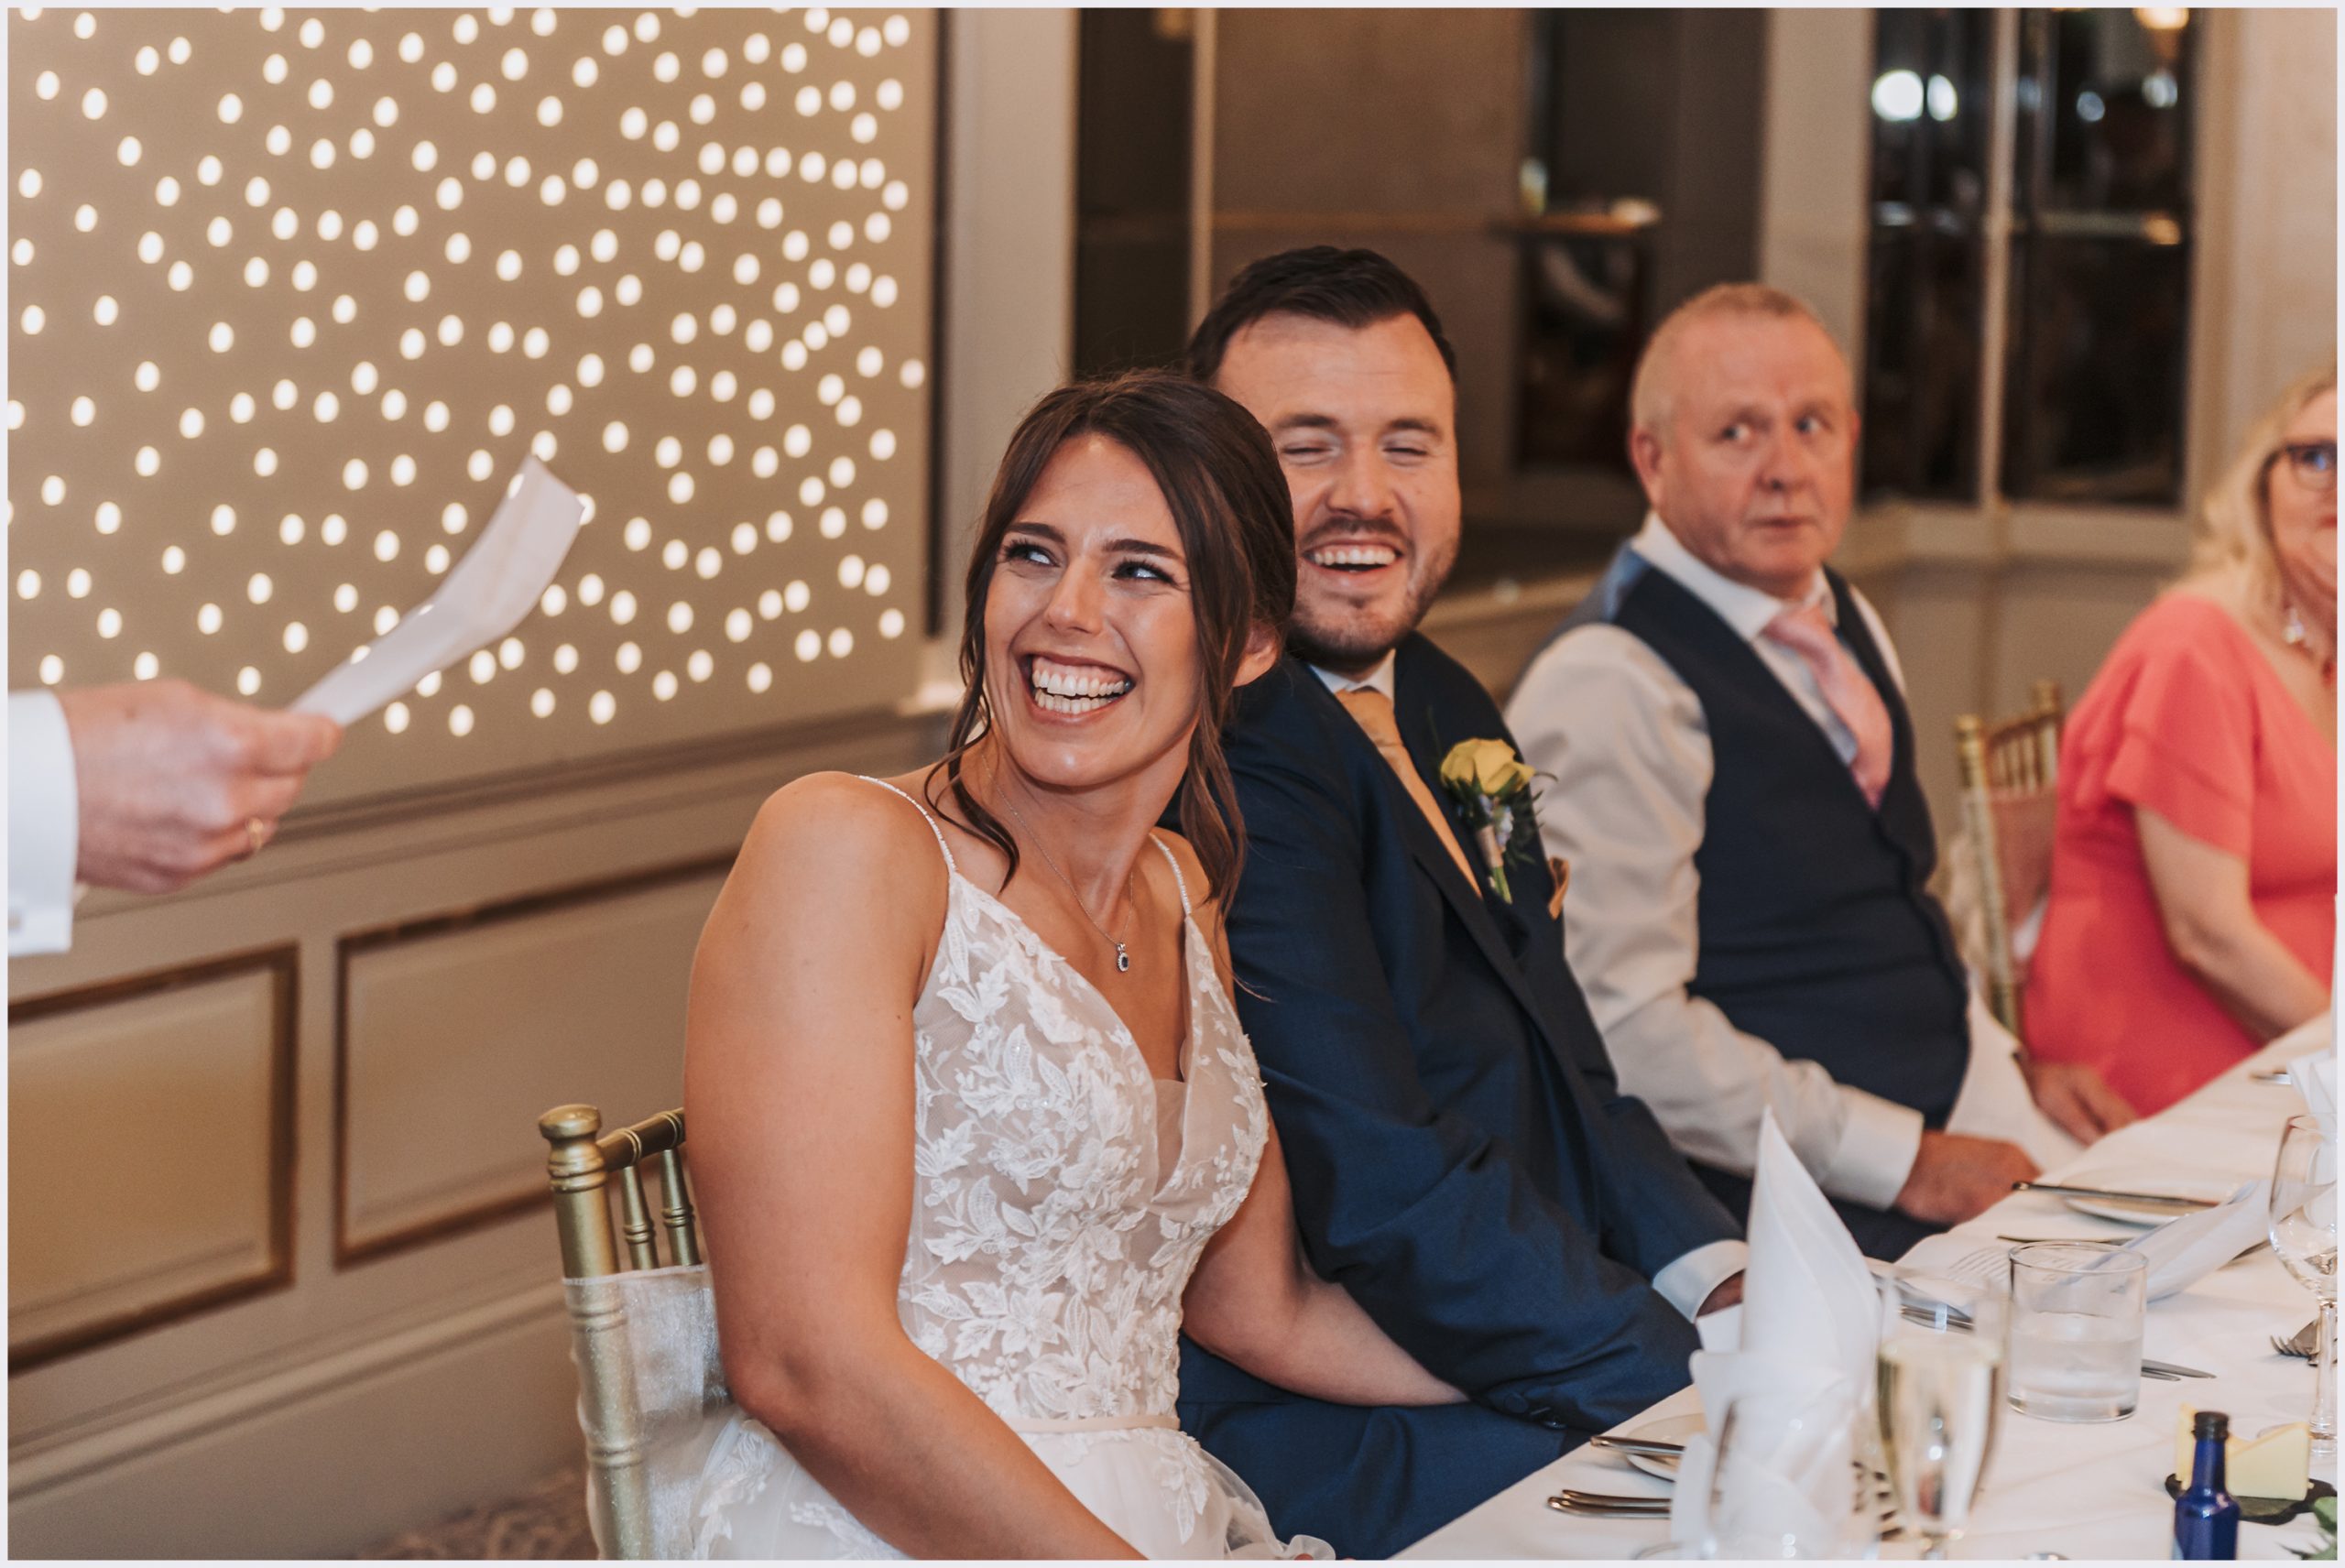 A bride laughs during her father's speech at her wedding at The Grosvenor Pulford Hotel and Spa.  Image captured by Helena Jayne Photography a wedding photographer based in Chester